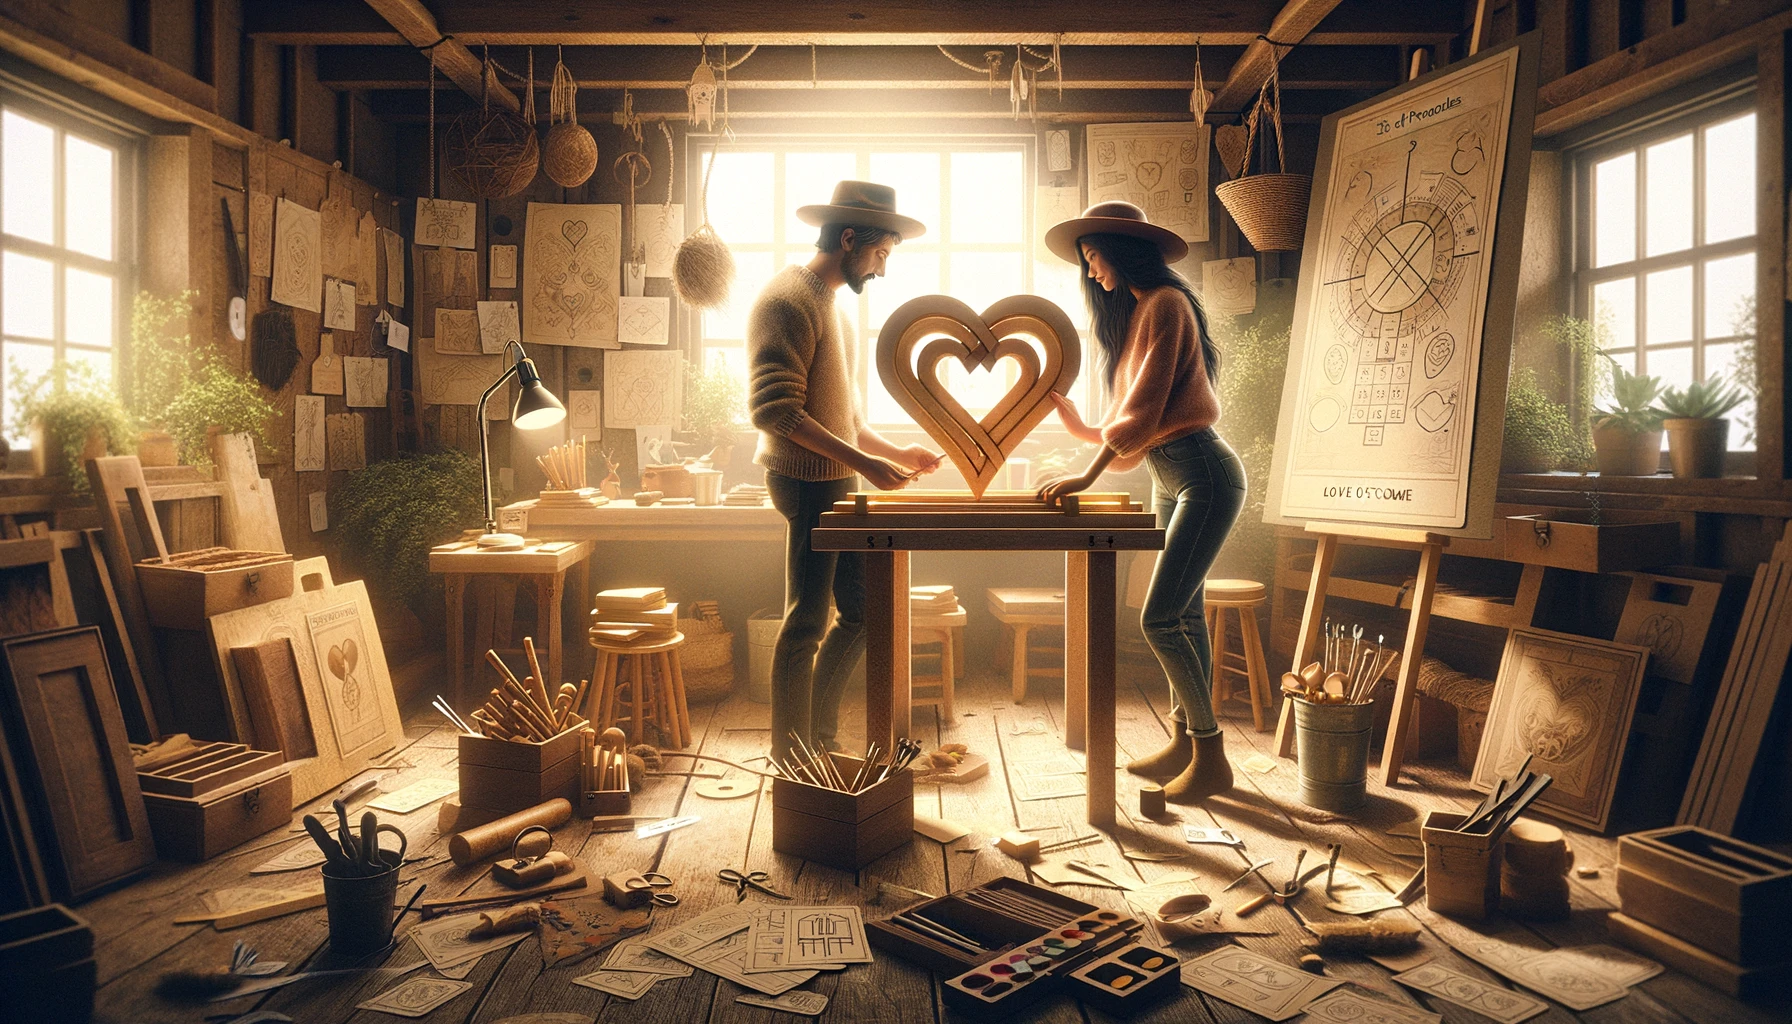 An illustration of a couple working together in a cozy workshop, building a sculpture of interlocking hearts. The scene symbolizes the construction of a strong and lasting relationship, embodying themes of teamwork, mutual support, and shared goals, as depicted in the Three of Pentacles tarot card.